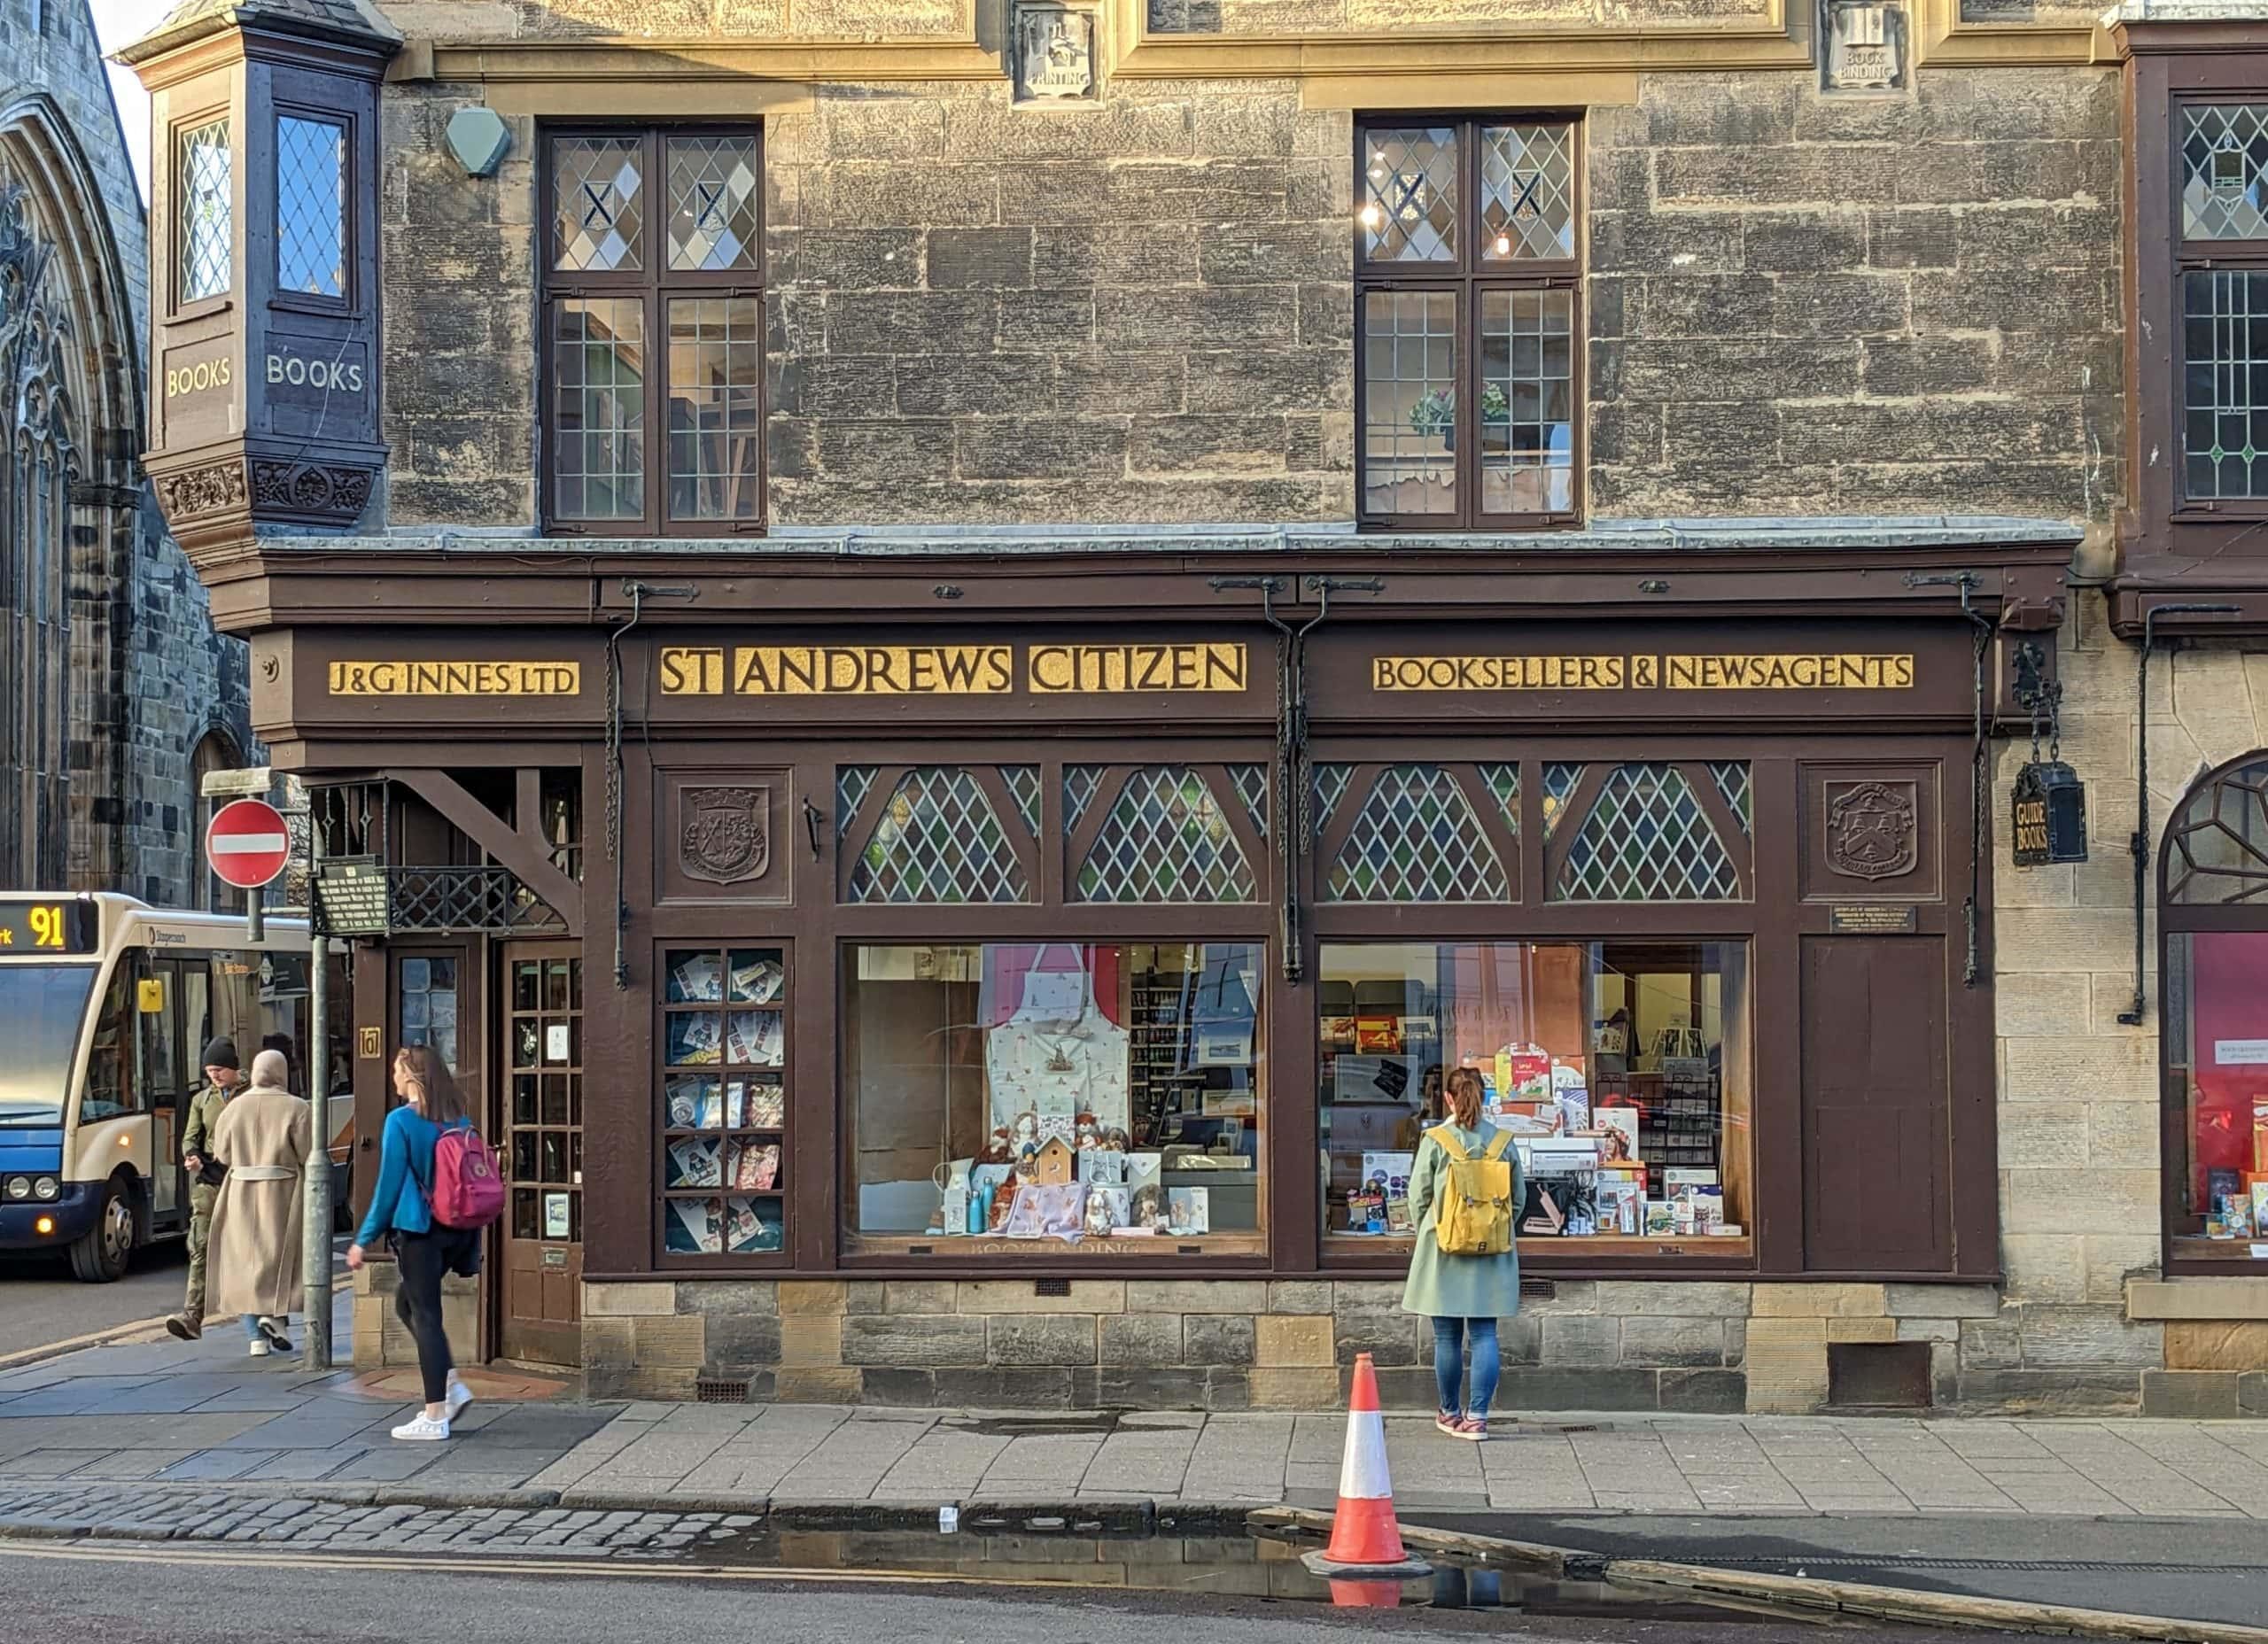 A picture of J&G Innes, booksellers in St Andrews, taken from South Street.